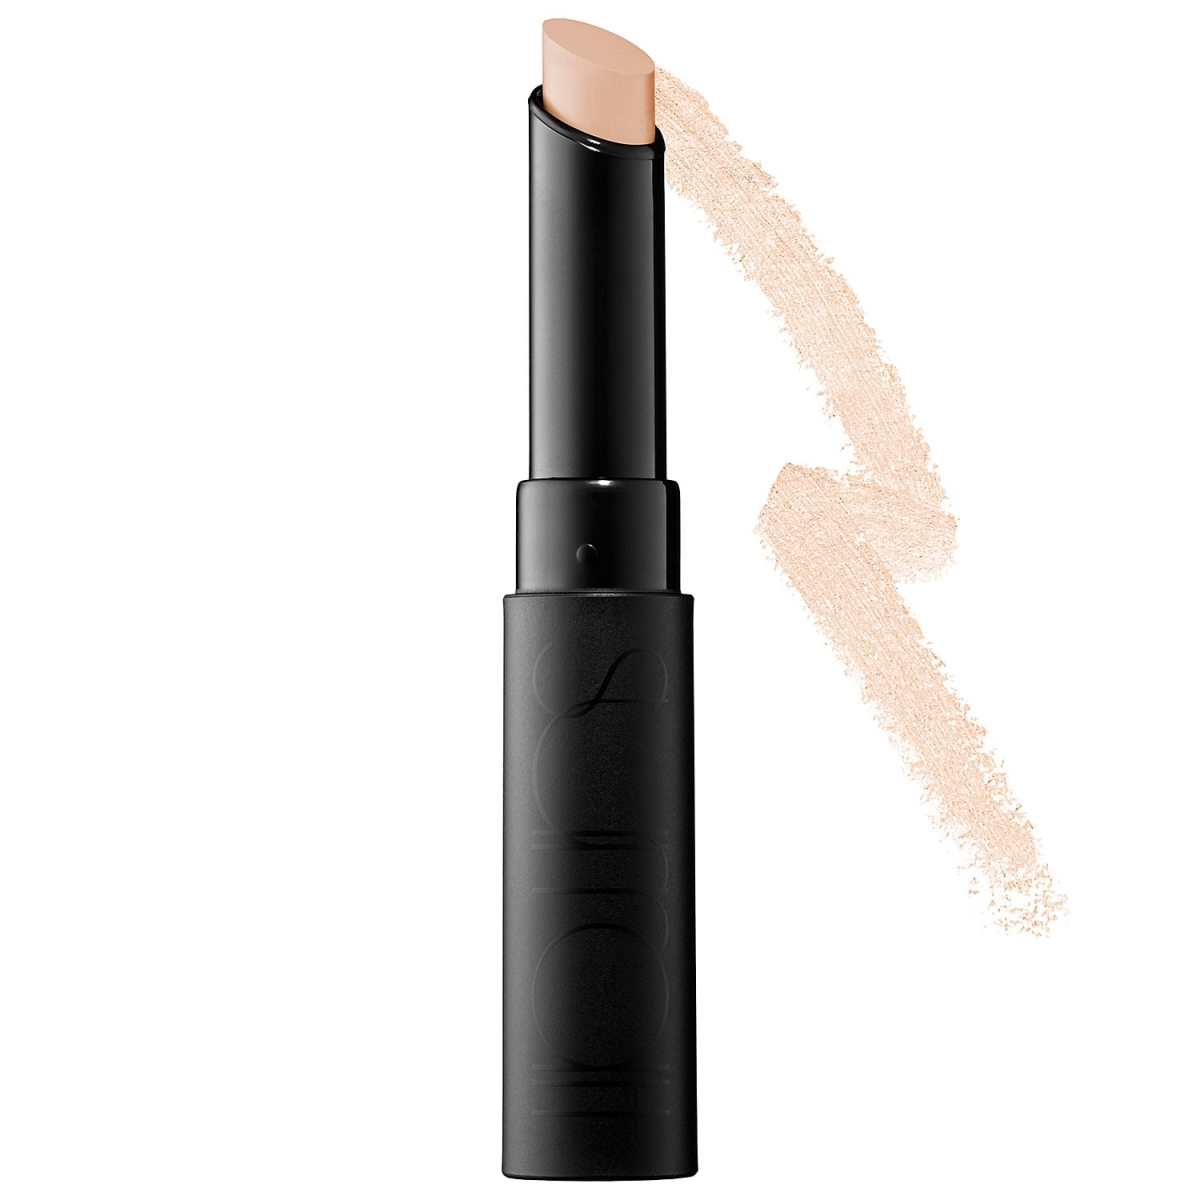 Picture of Surratt Beauty 244790 Surreal Skin Concealer - No.4 Light to Medium with Peach to Neutral Undertones - 0.06 oz